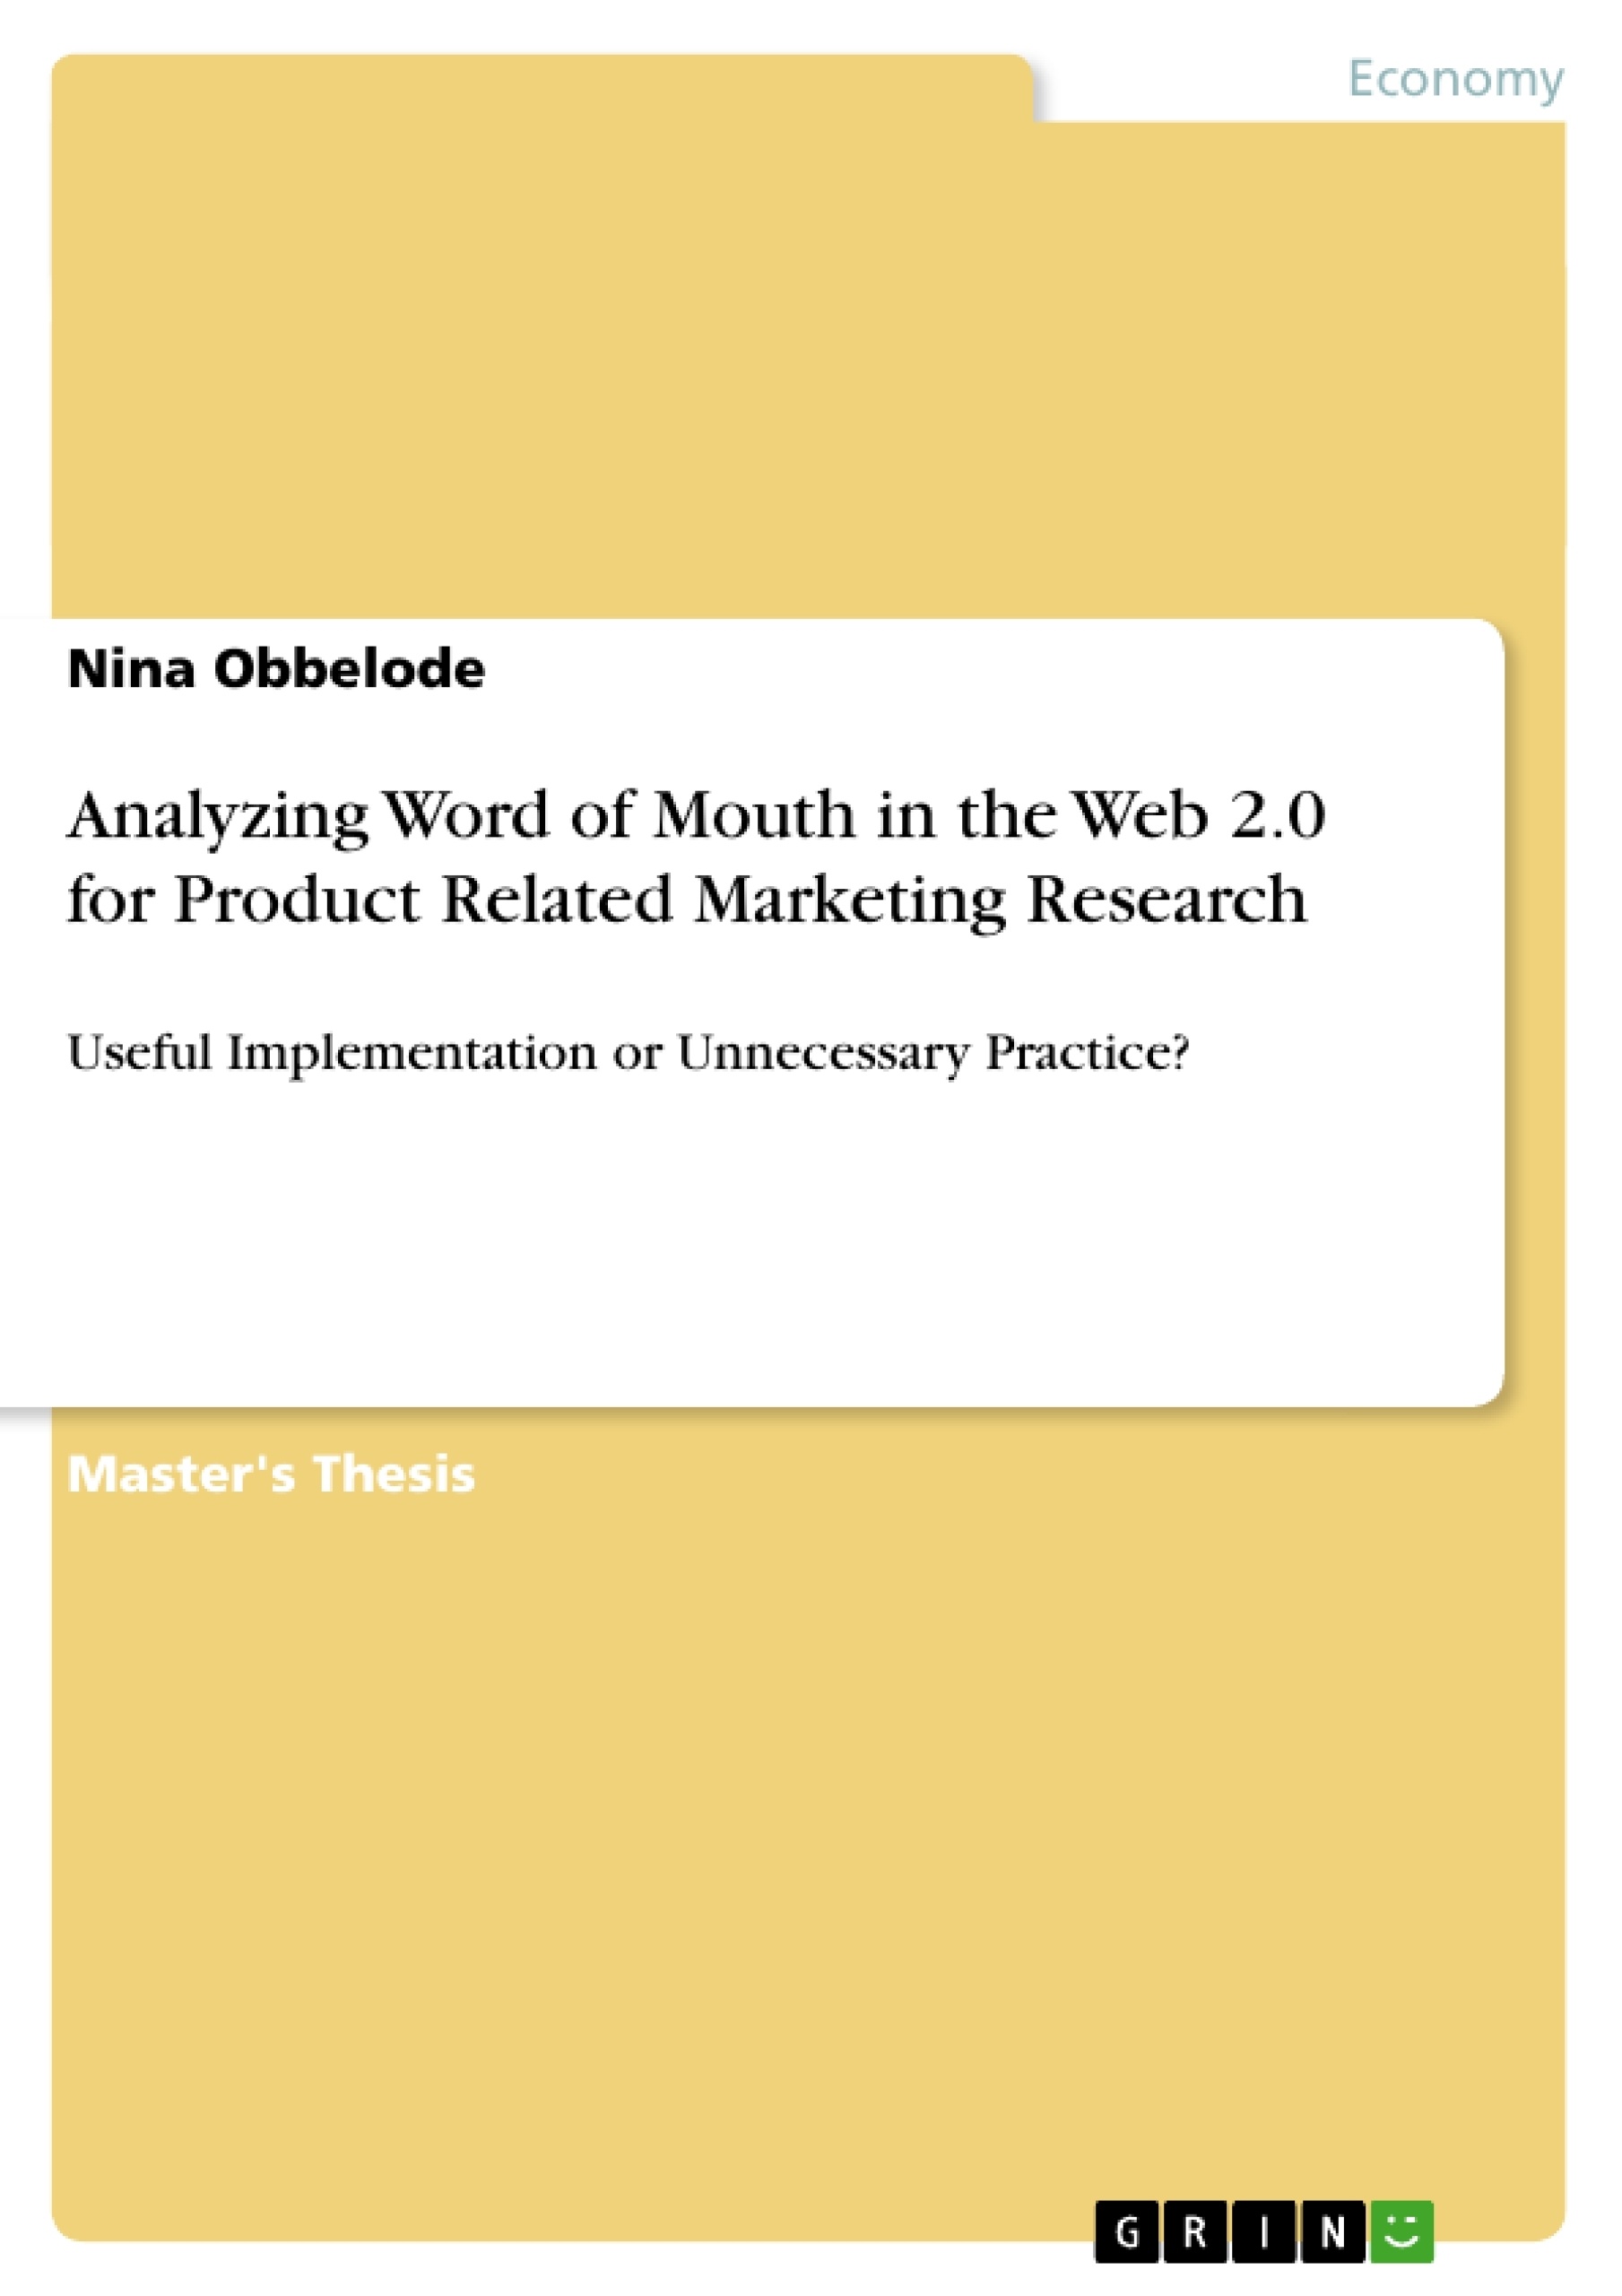 Titre: Analyzing Word of Mouth in the Web 2.0 for Product Related Marketing Research